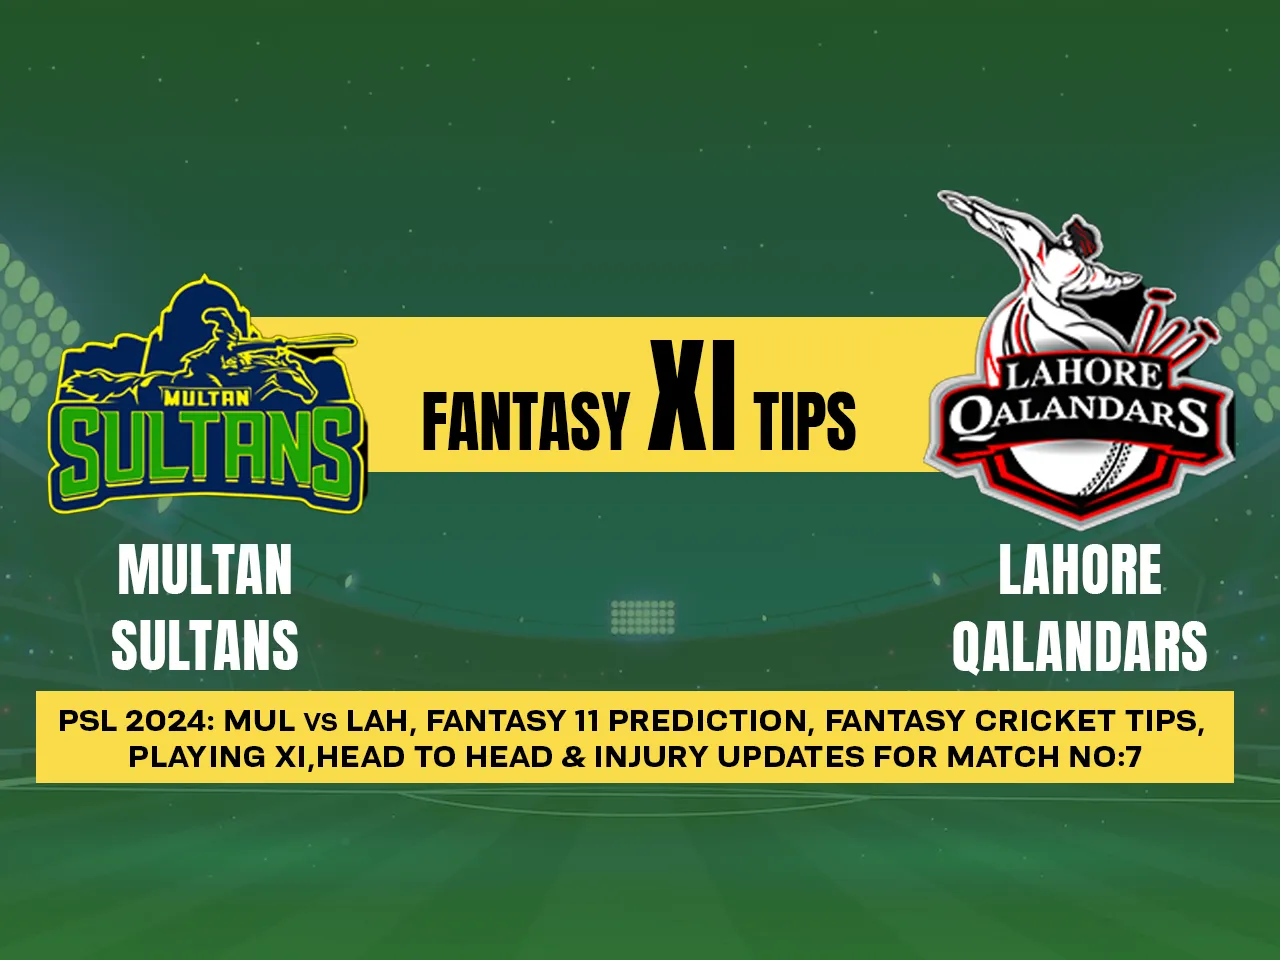 PSL 2024: MUL vs LAH Dream11 Prediction, PSL Fantasy Cricket Tips, Playing XI, Pitch Report & Injury Updates For Match 7